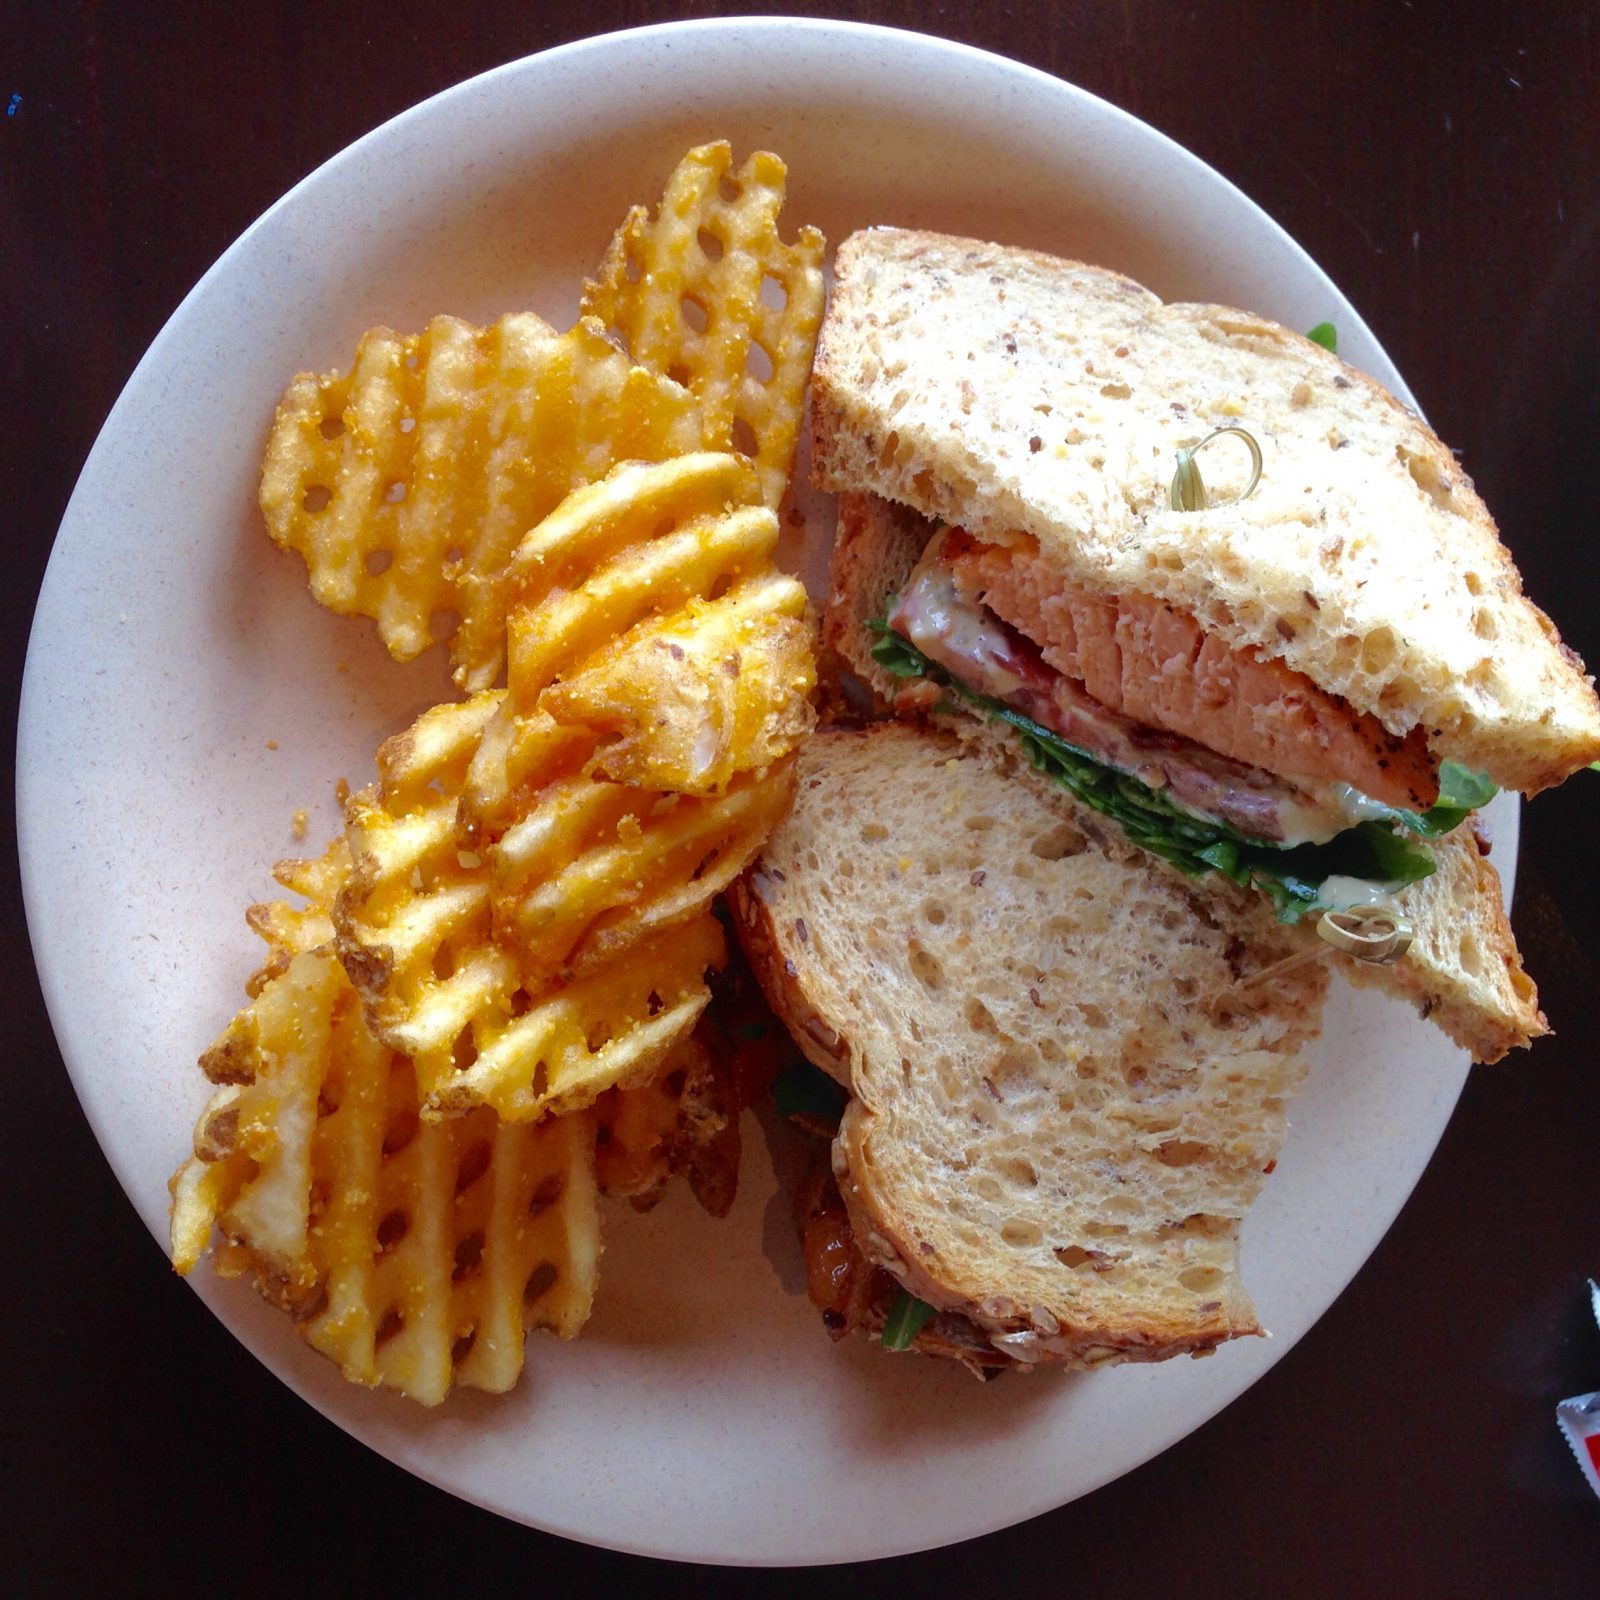 Salmon BLT and waffle fries from geyser point